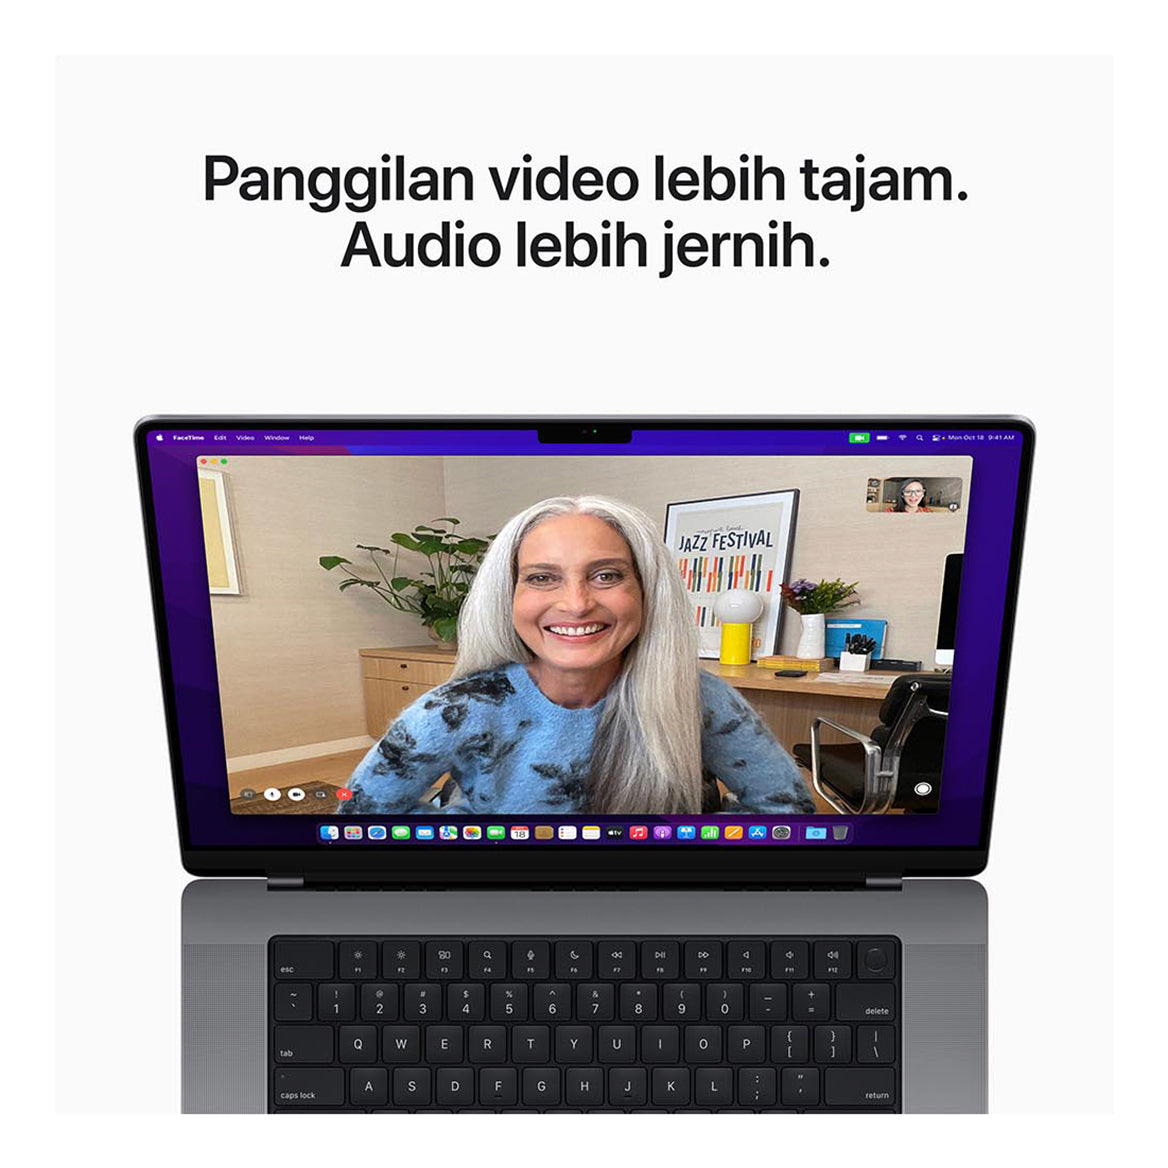 Products MacBook Pro M1 video call 2